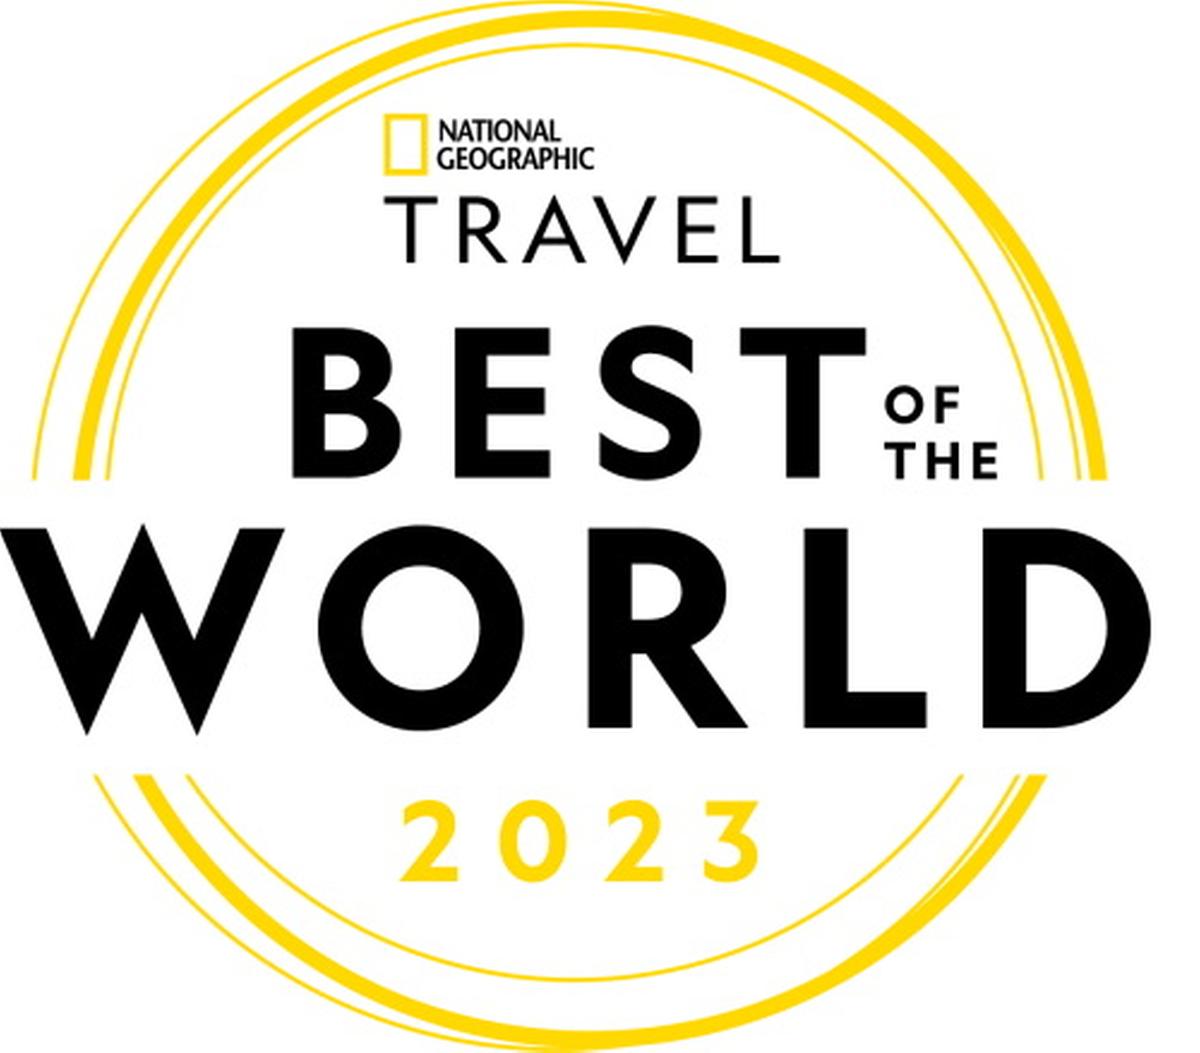 National Geographic's 'Best of the World' destinations 2023